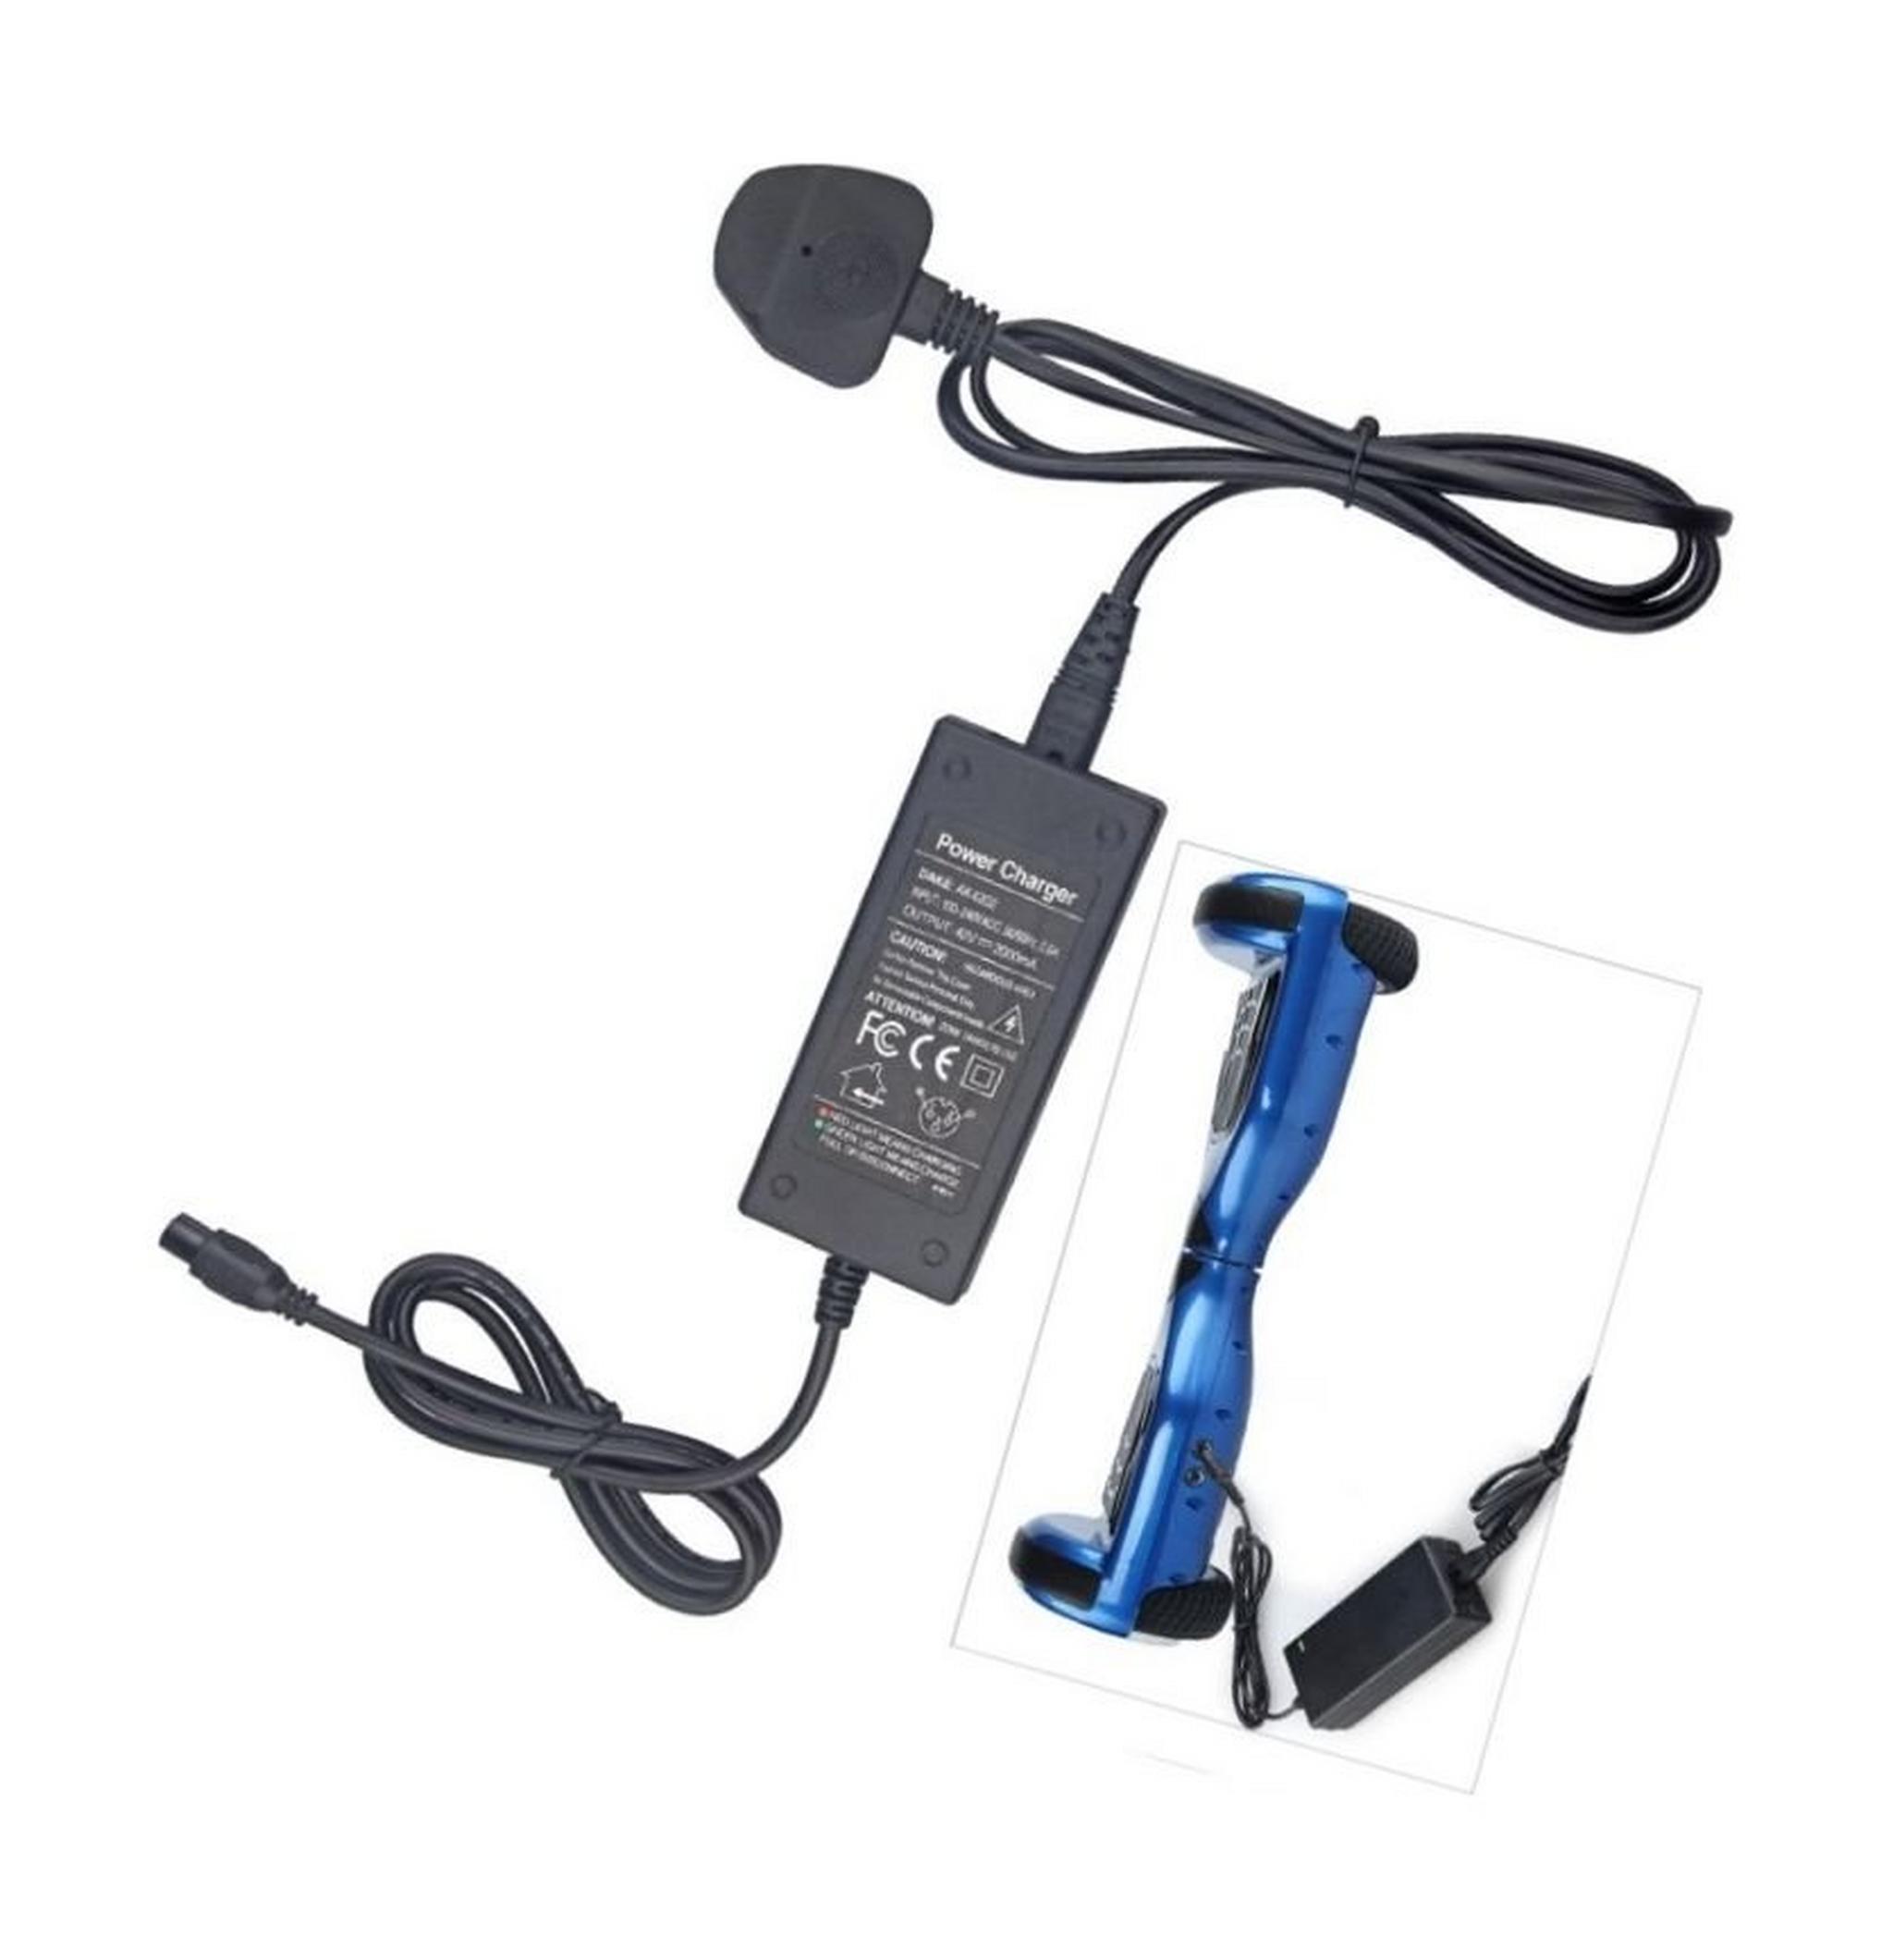 Scooter Power Charger - Black